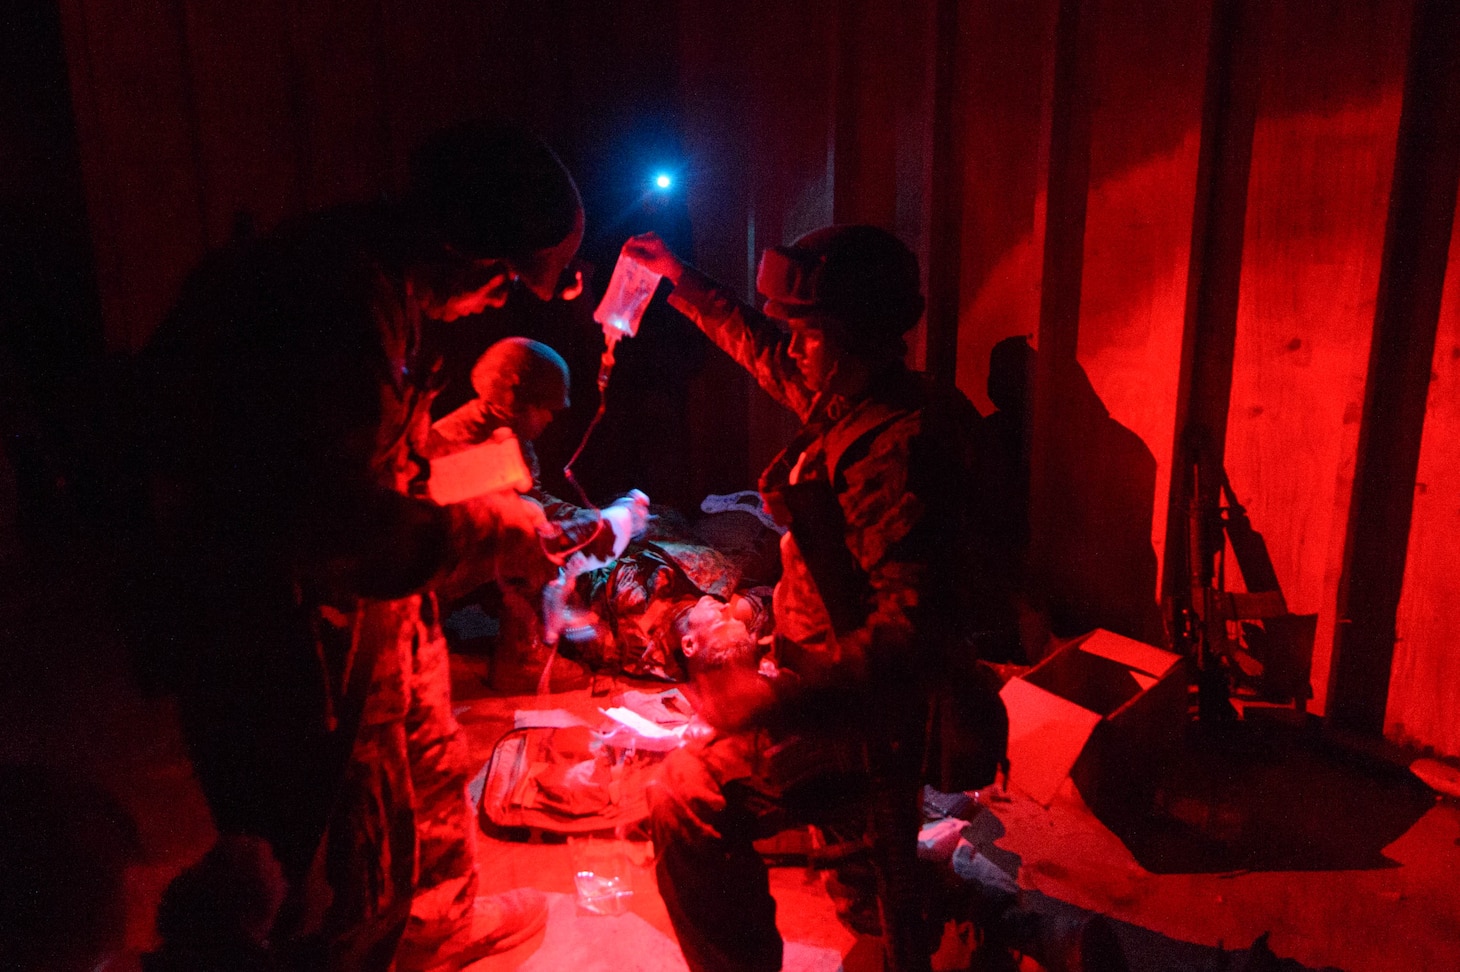 Sailors administer medical care to a mannequin in red light.